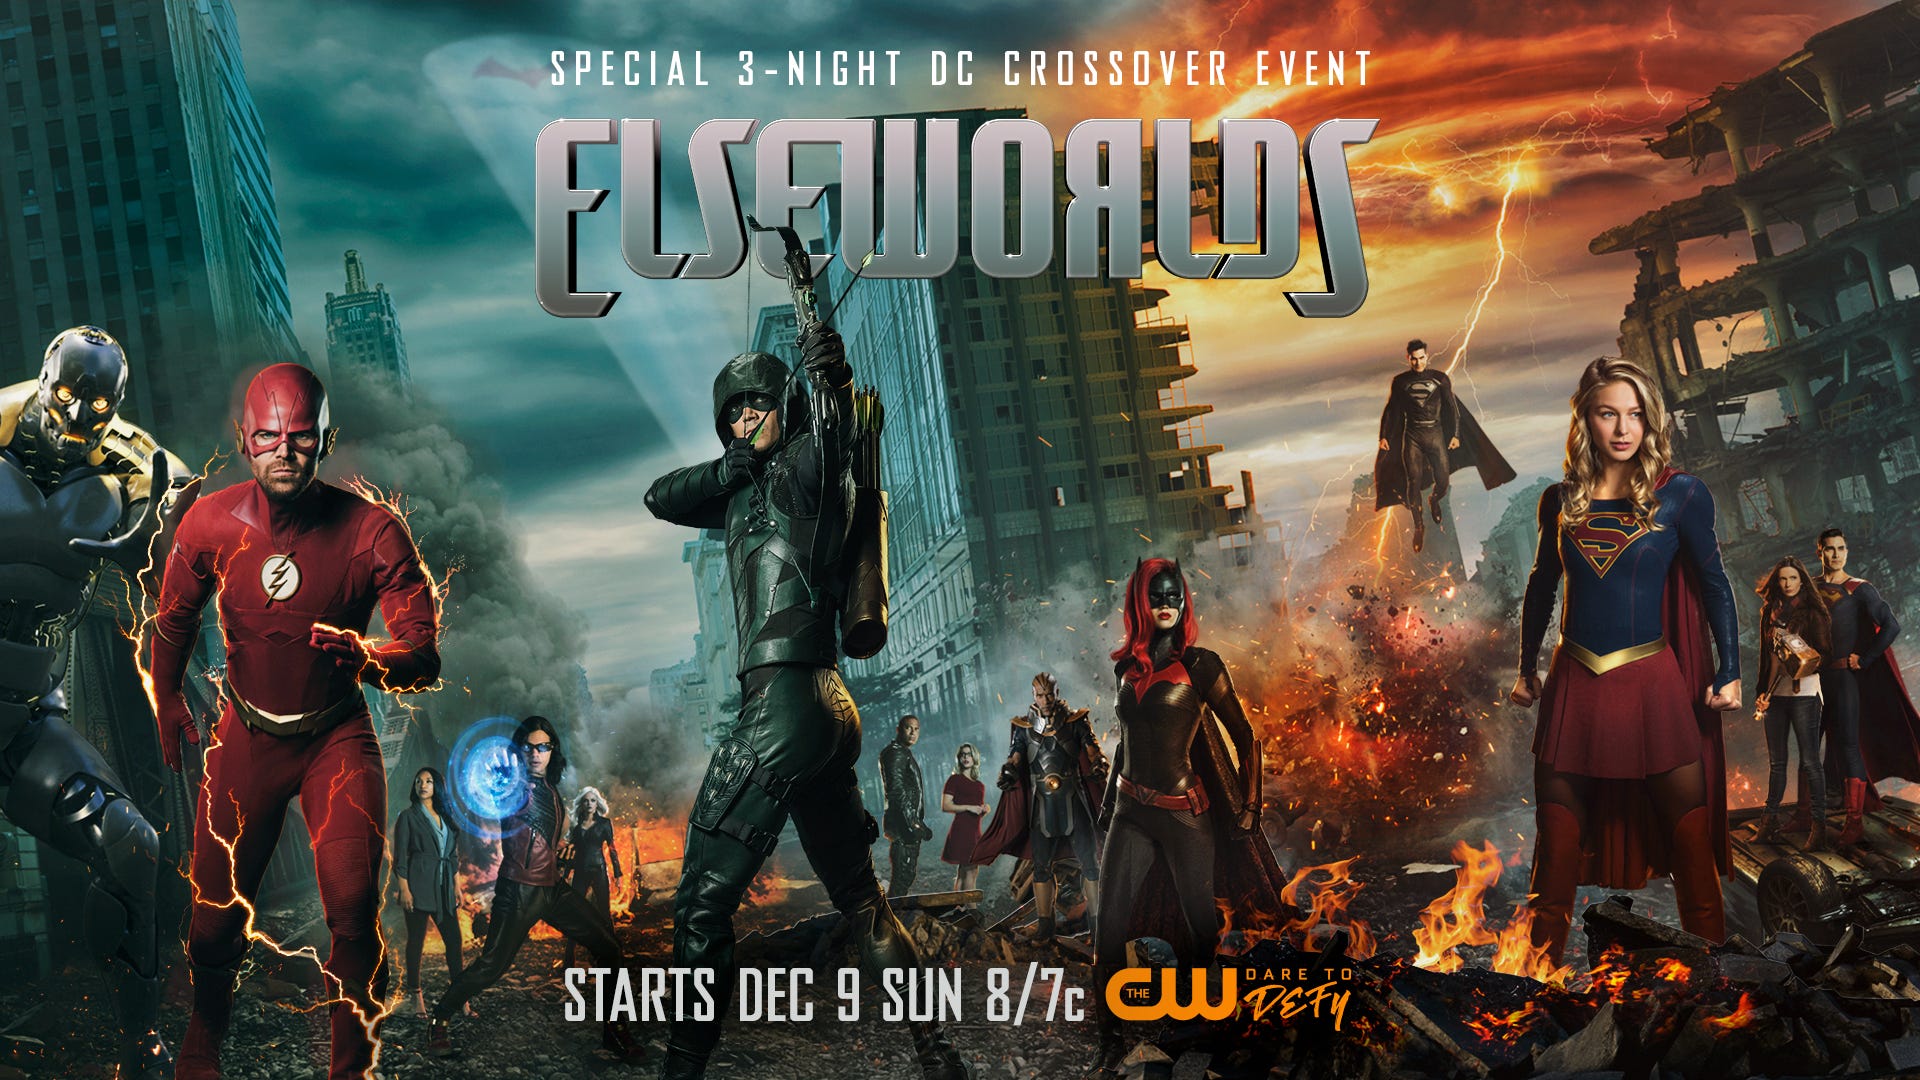 Elseworlds, Arrow, The Flash and Supergirl